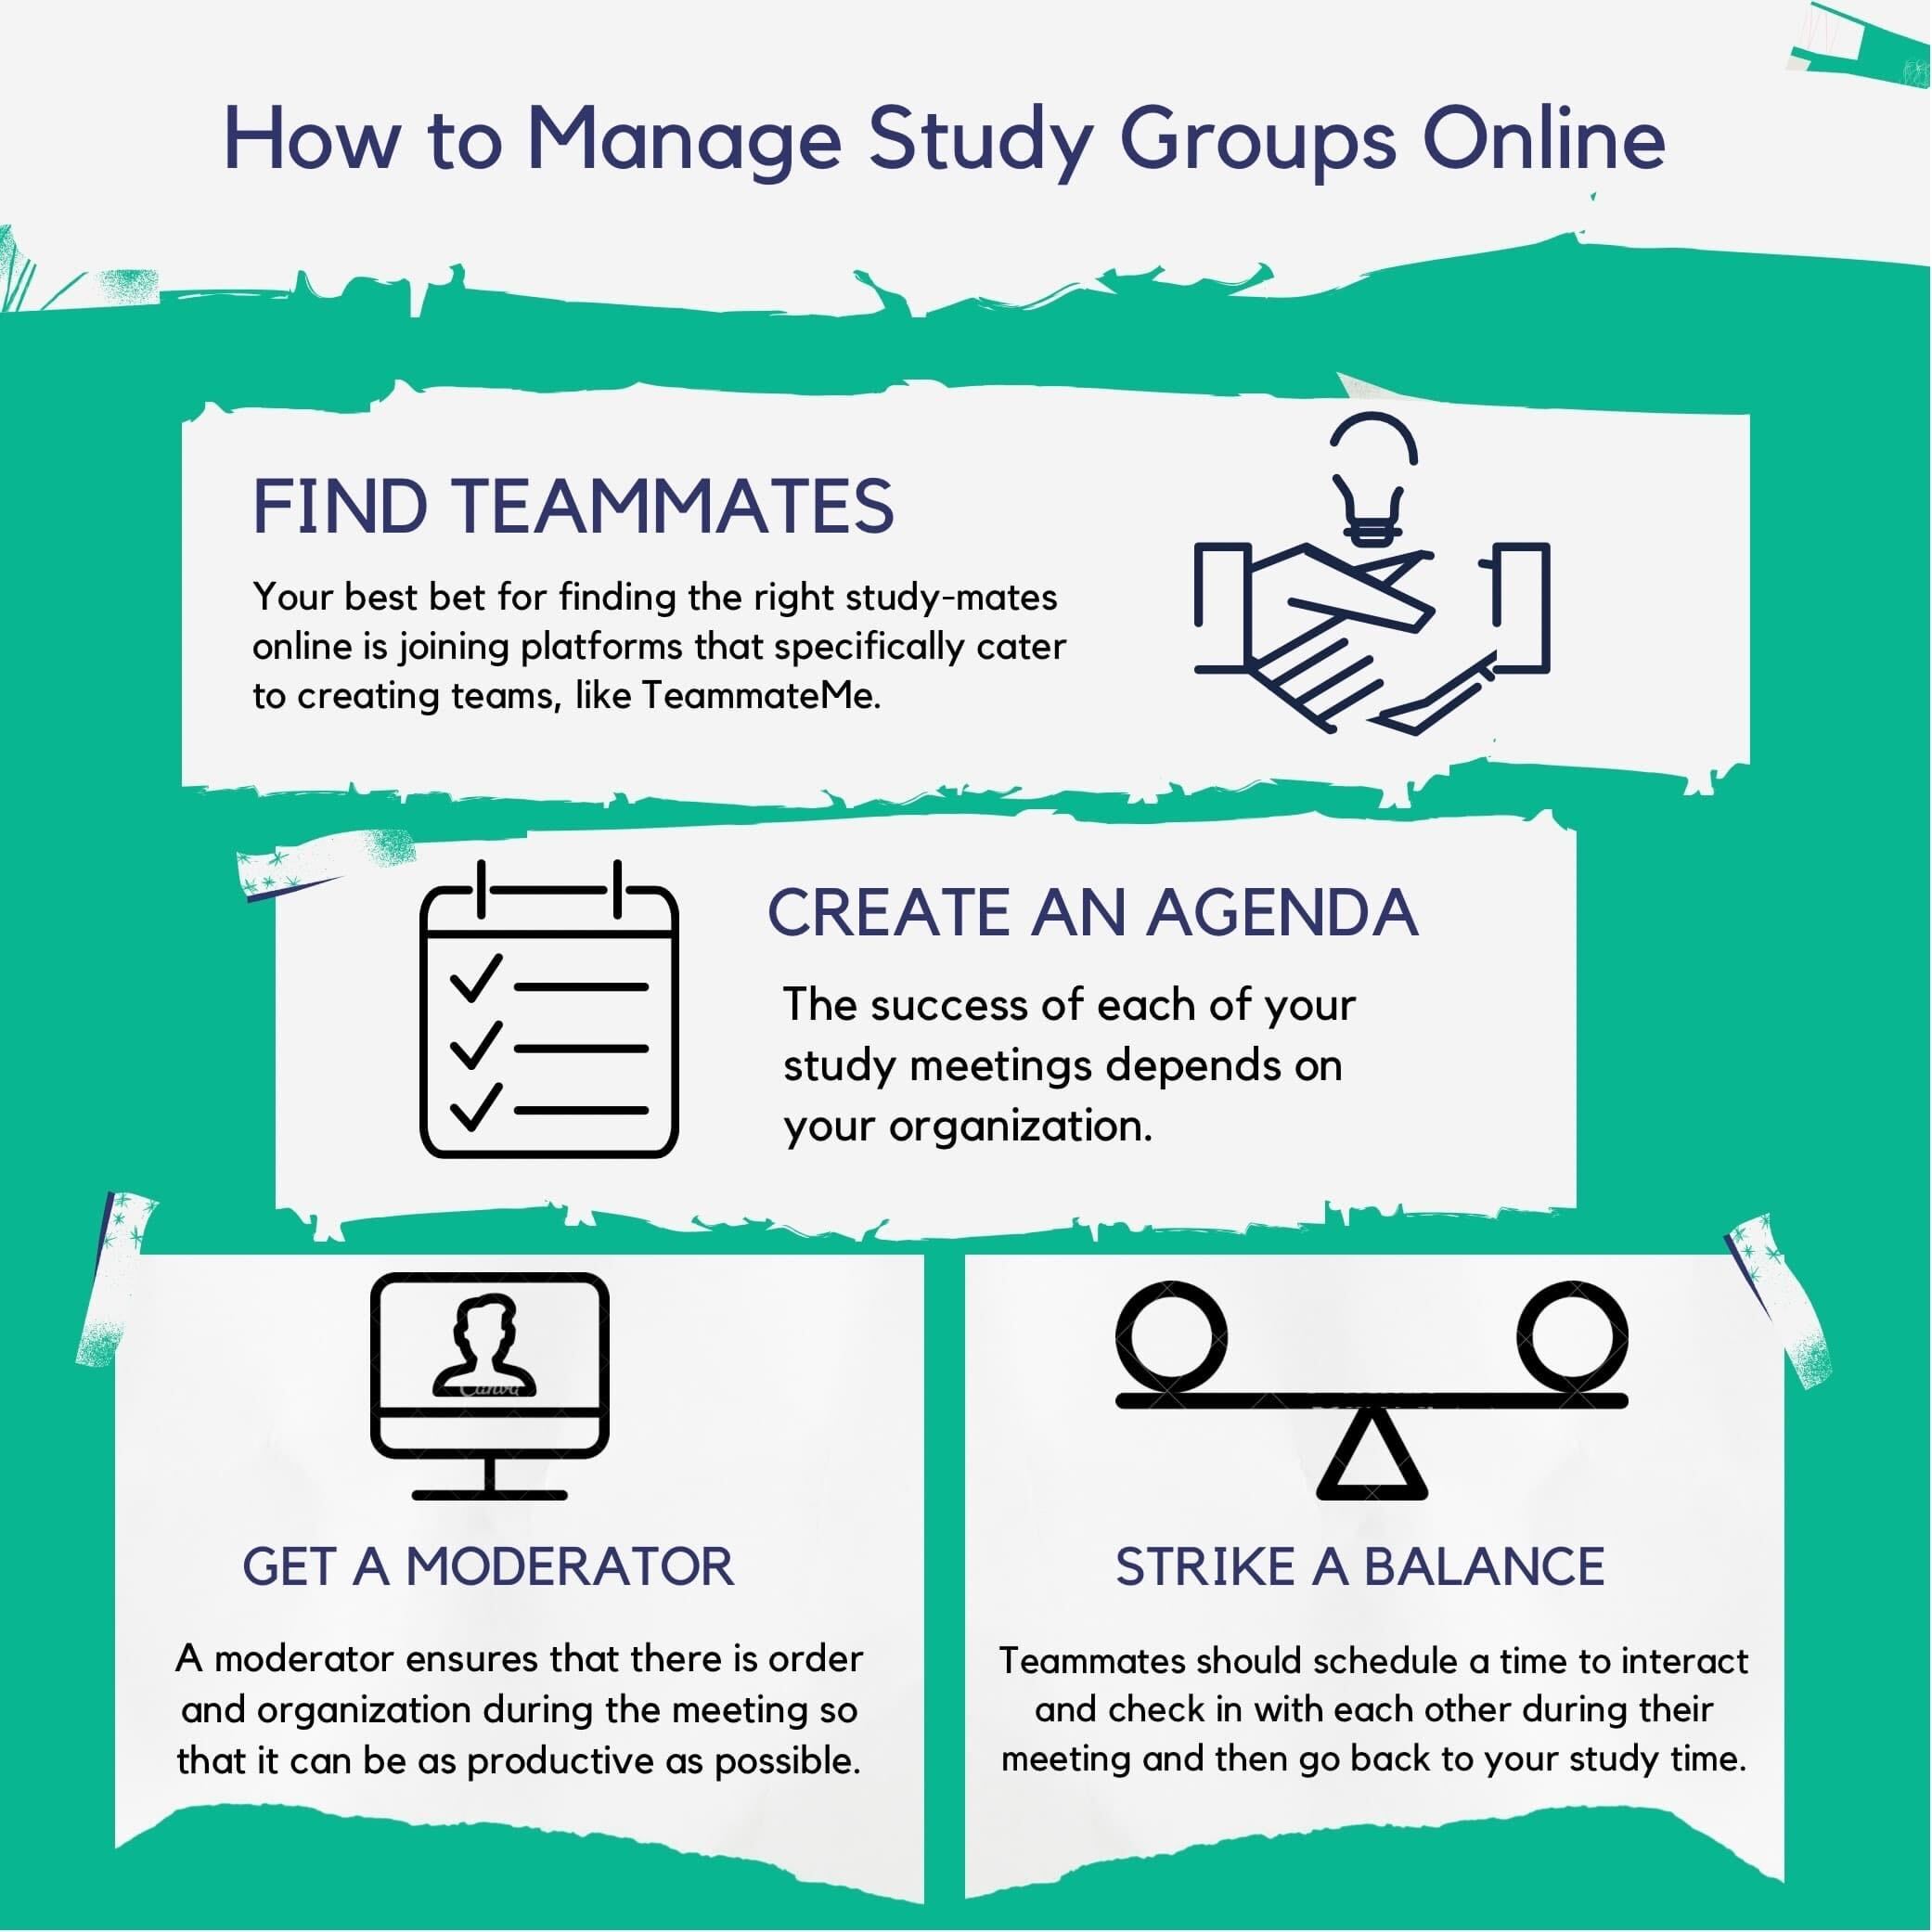 How to Manage Study Groups Online - Infographic